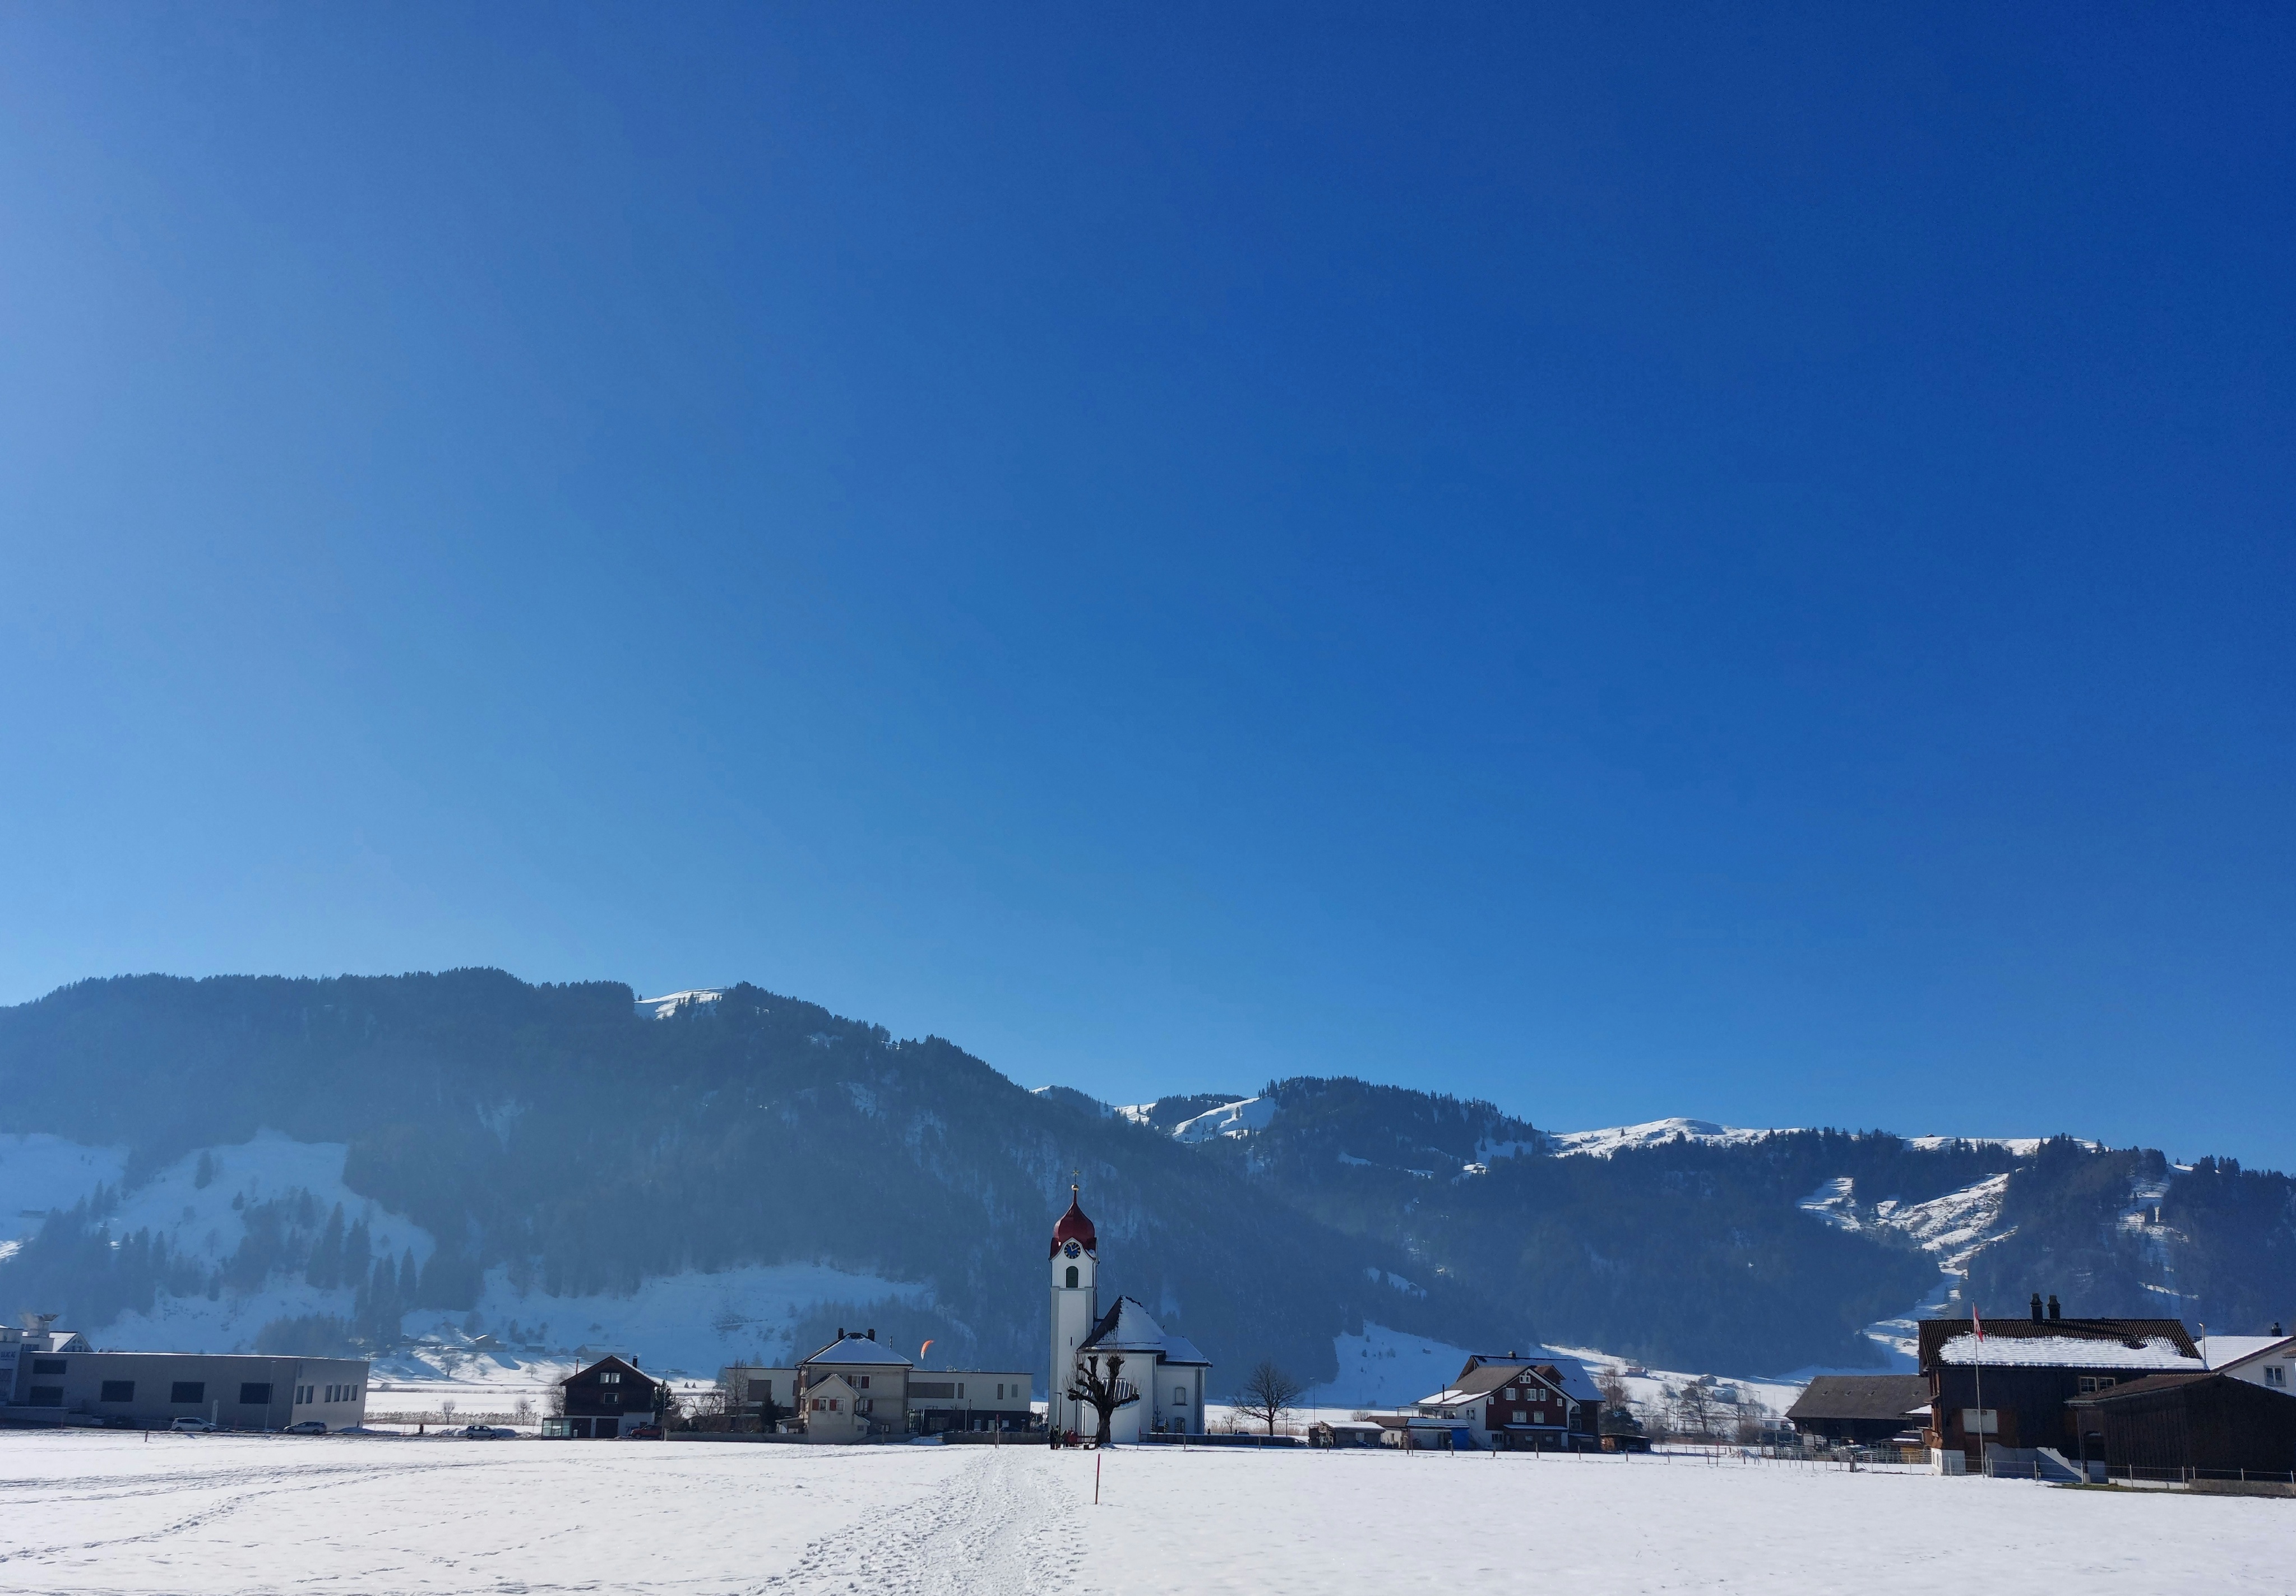 Church in front of row of mountains, field covered in snow